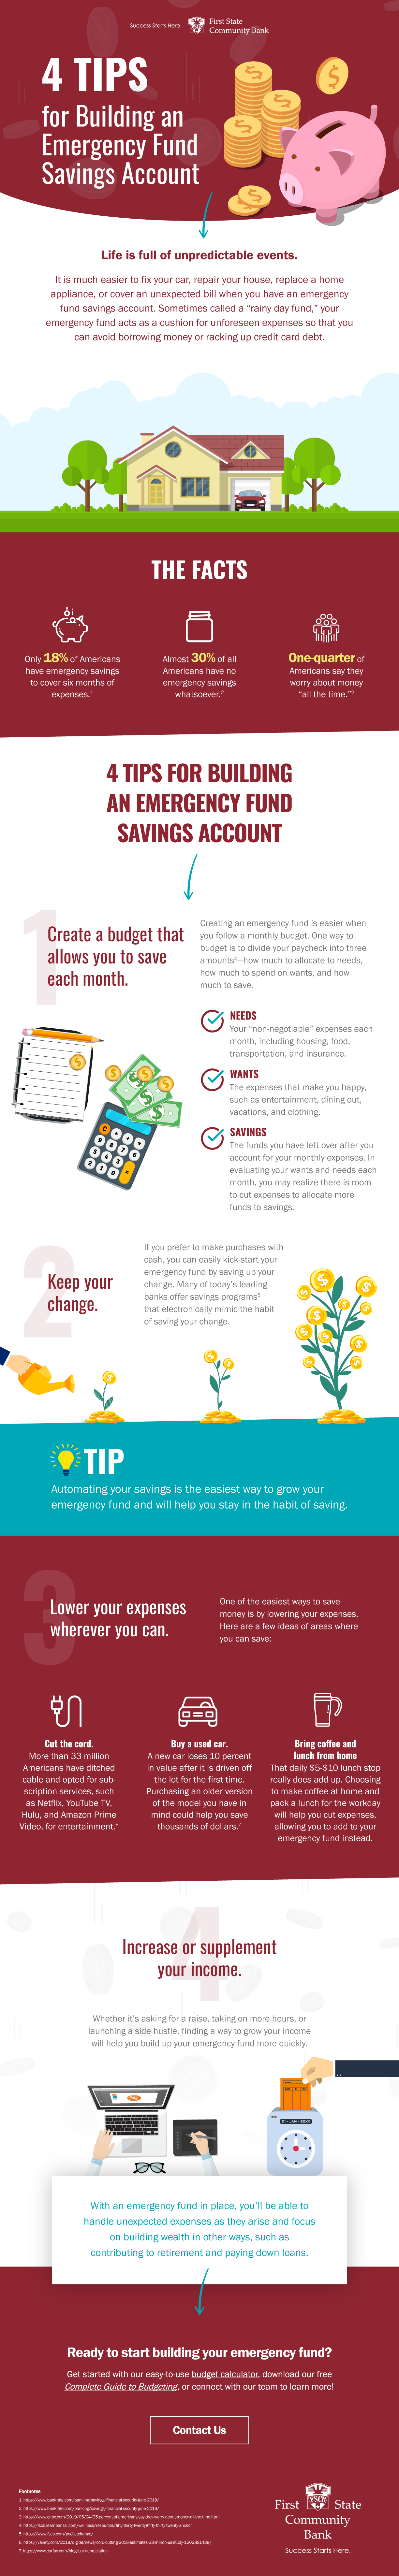 FSCB Infographic - 4 Tips for Building an Emergency Fund Savings Account